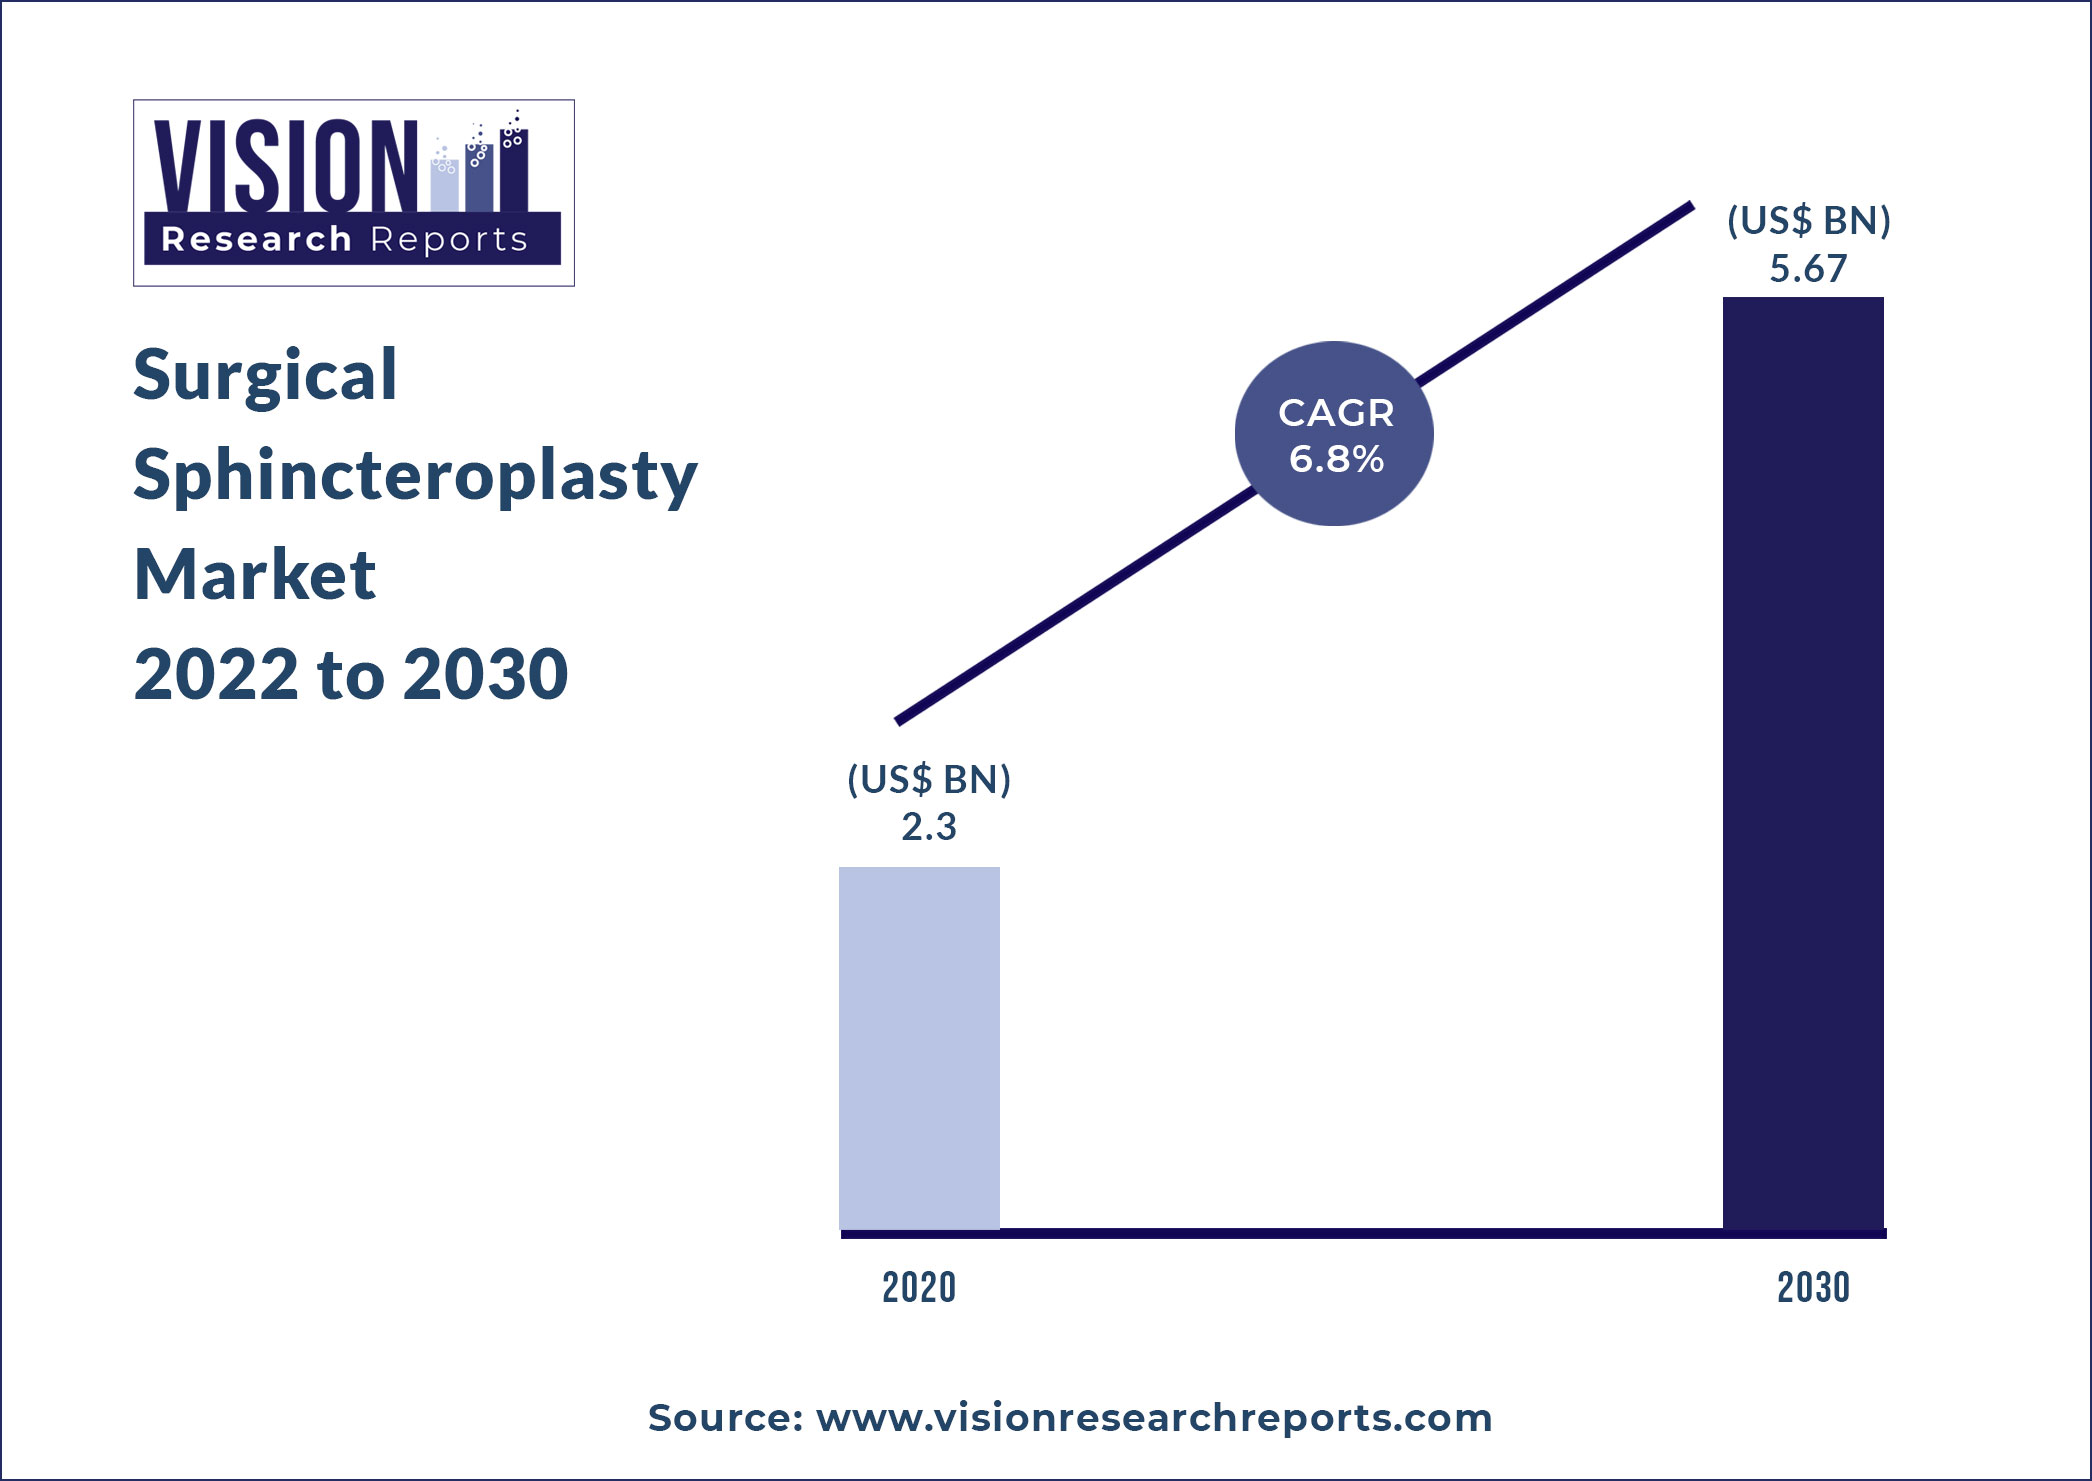 Surgical Sphincteroplasty Market Size 2022 to 2030